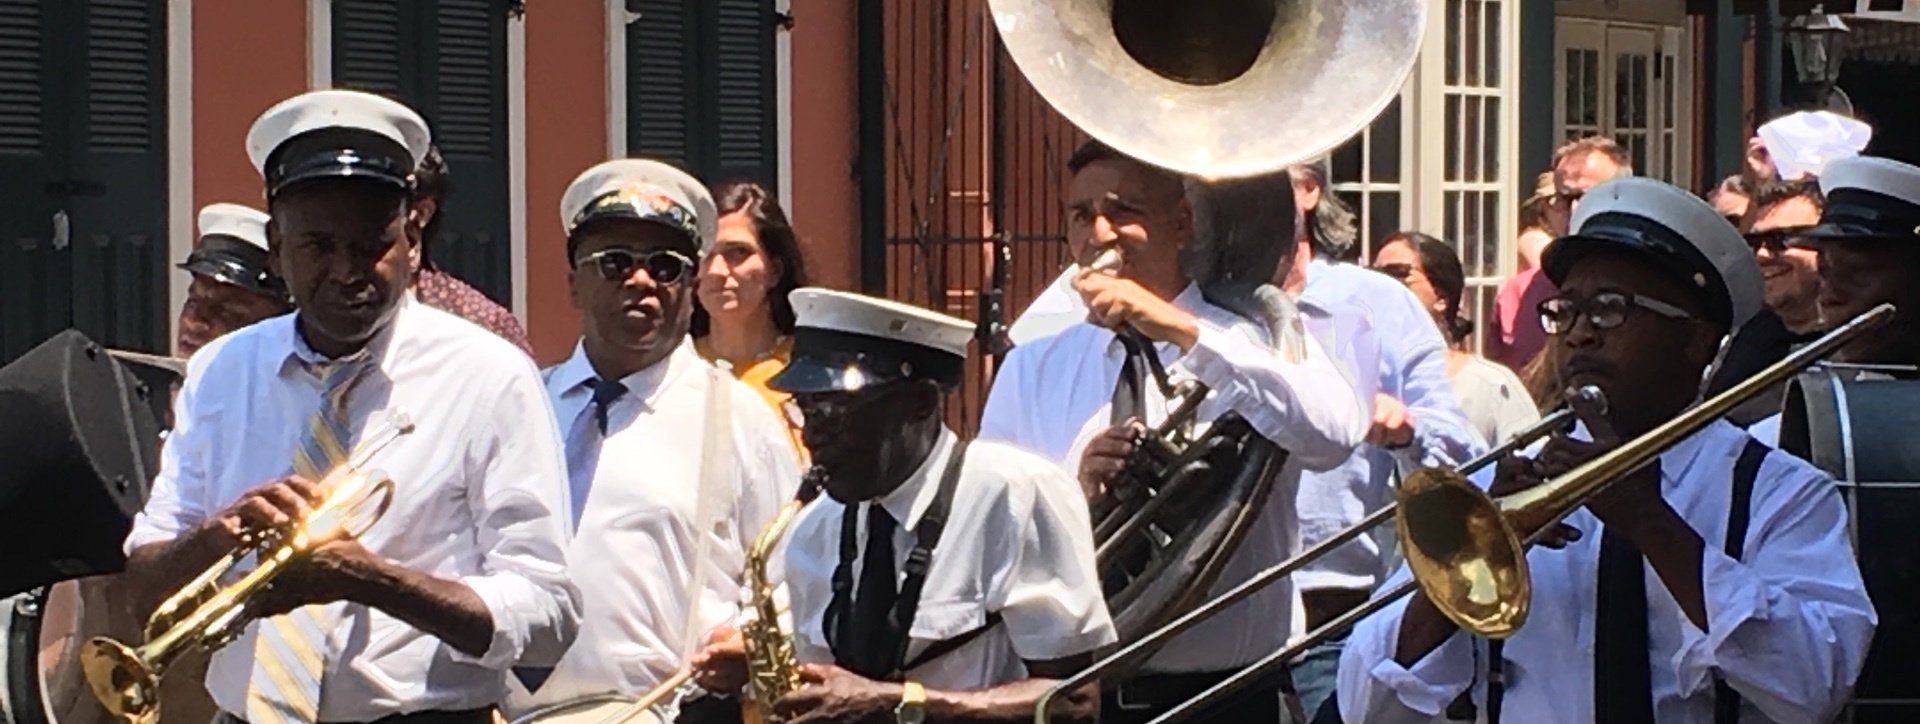 New Orleans second line musicians